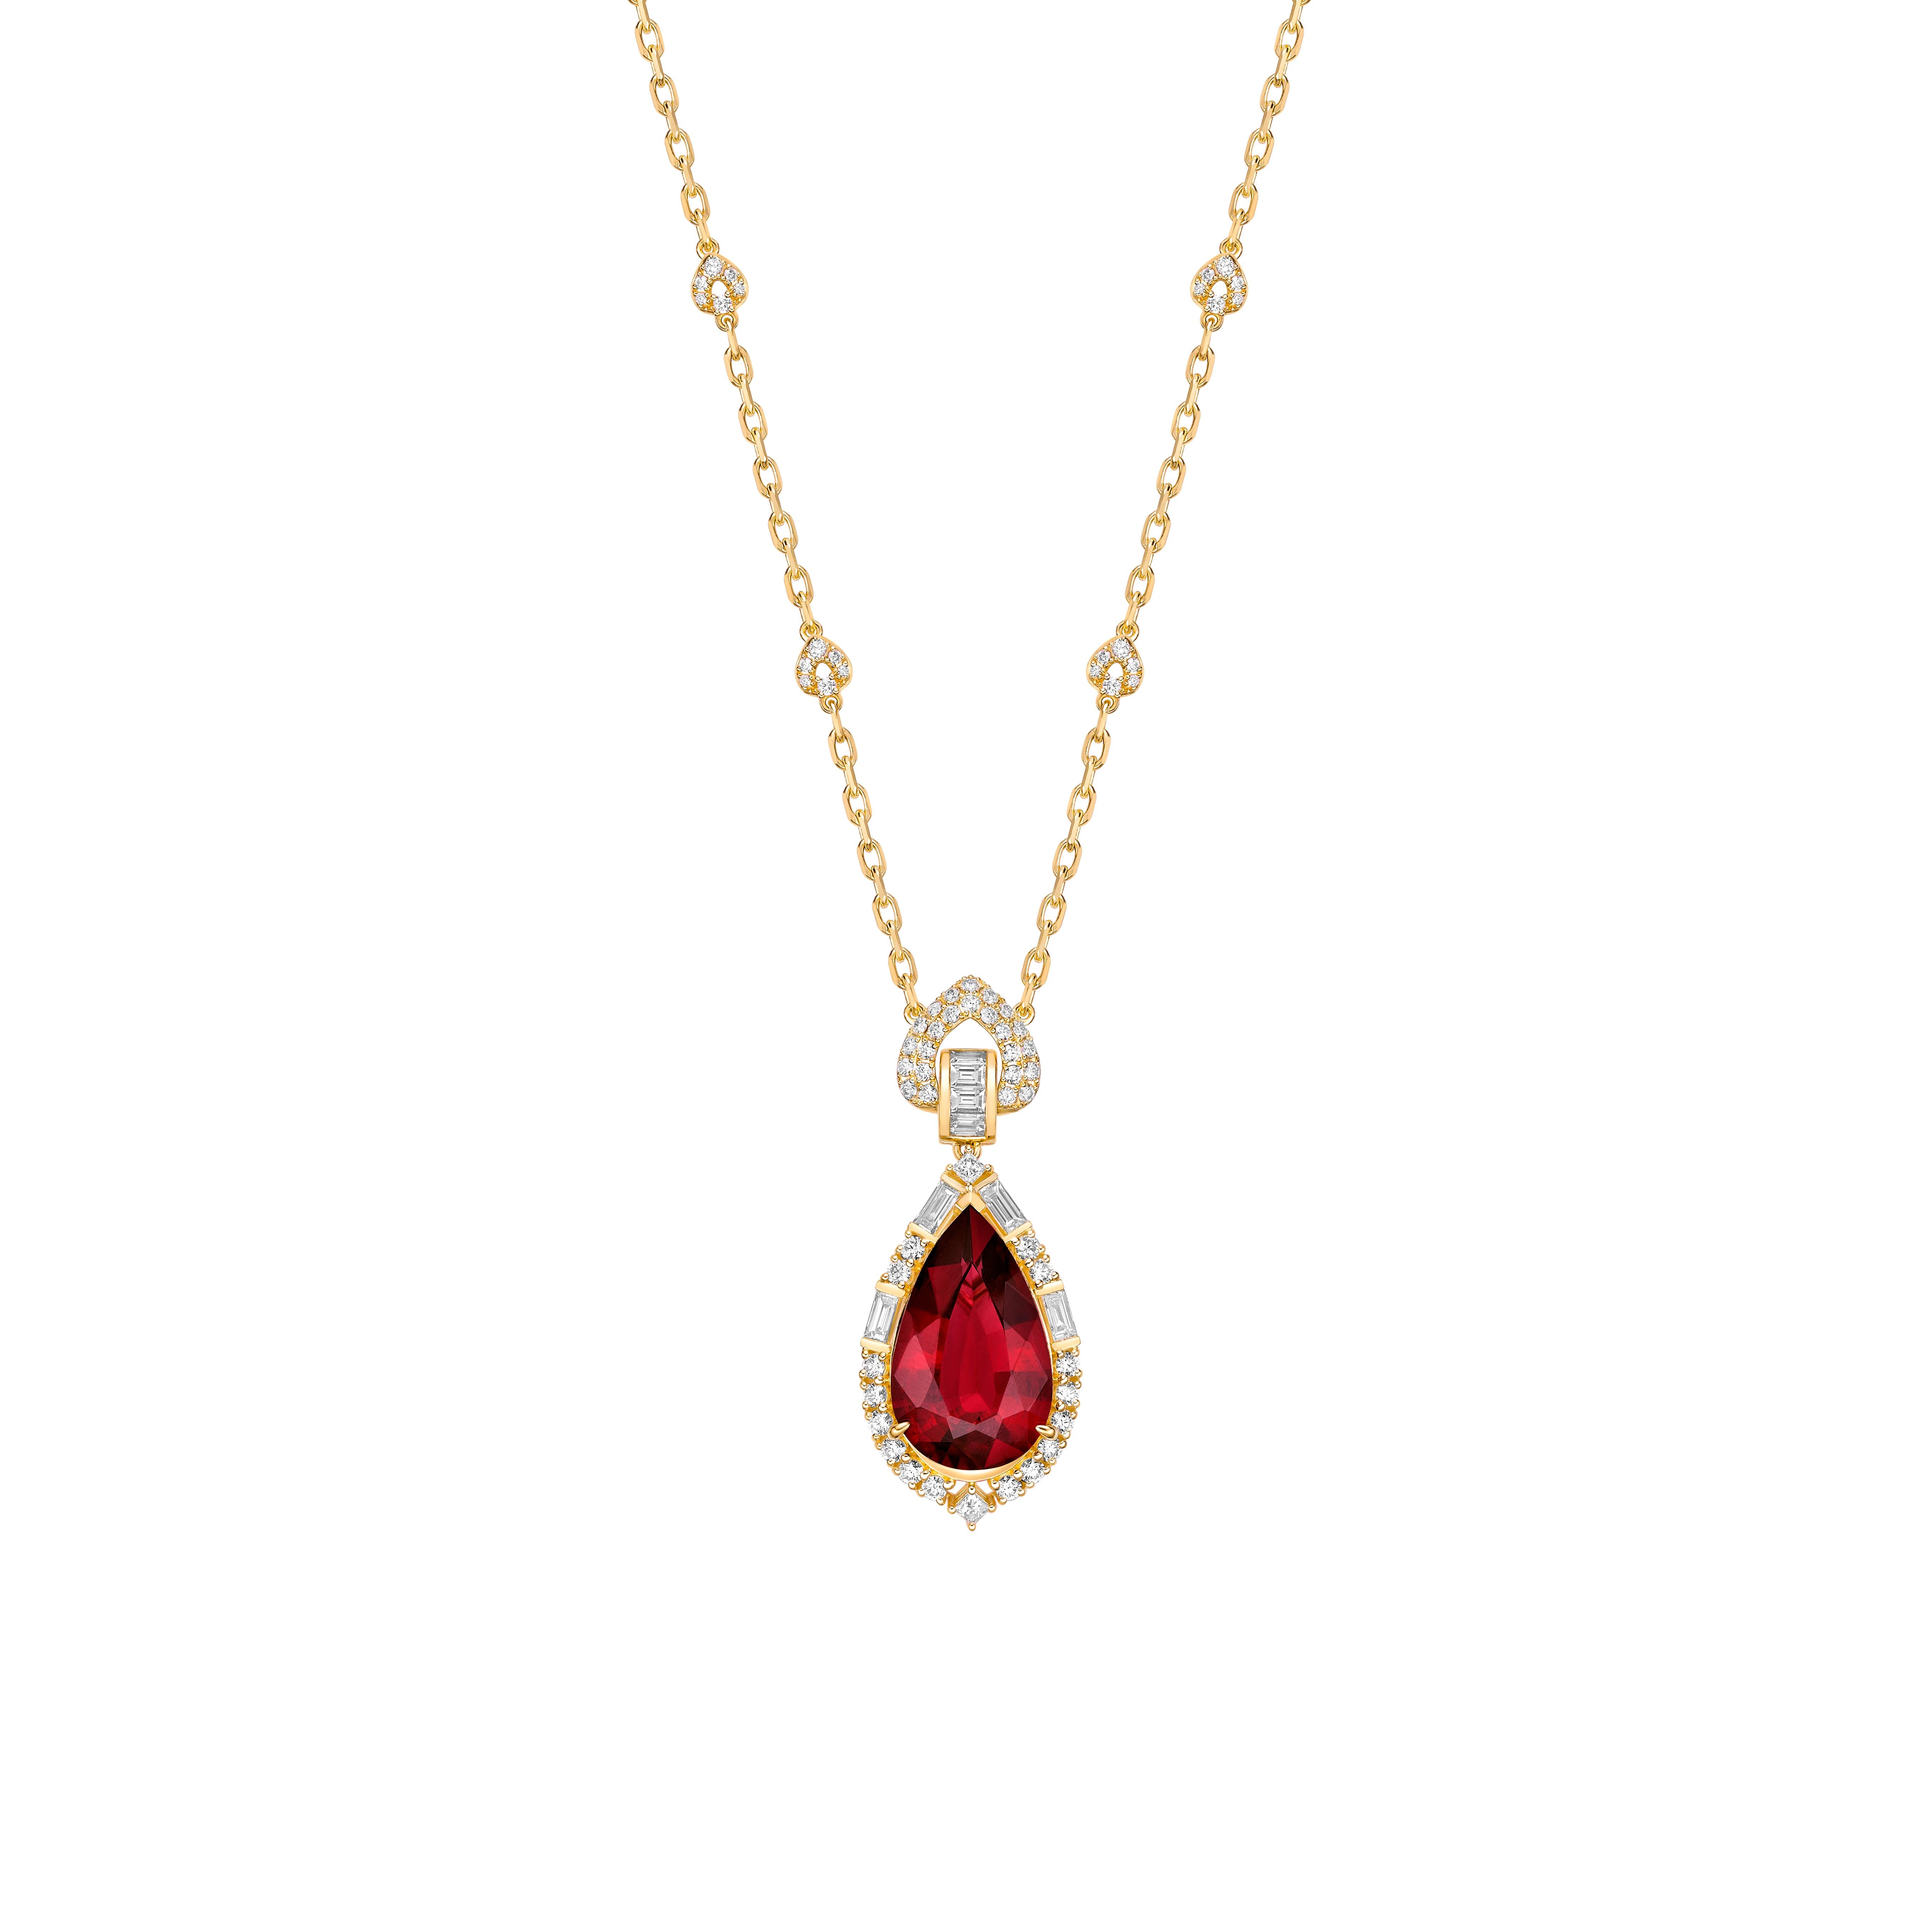 Pear Cut 11.72 Carat Rubellite Necklace in 18Karat Yellow Gold with White Diamond For Sale